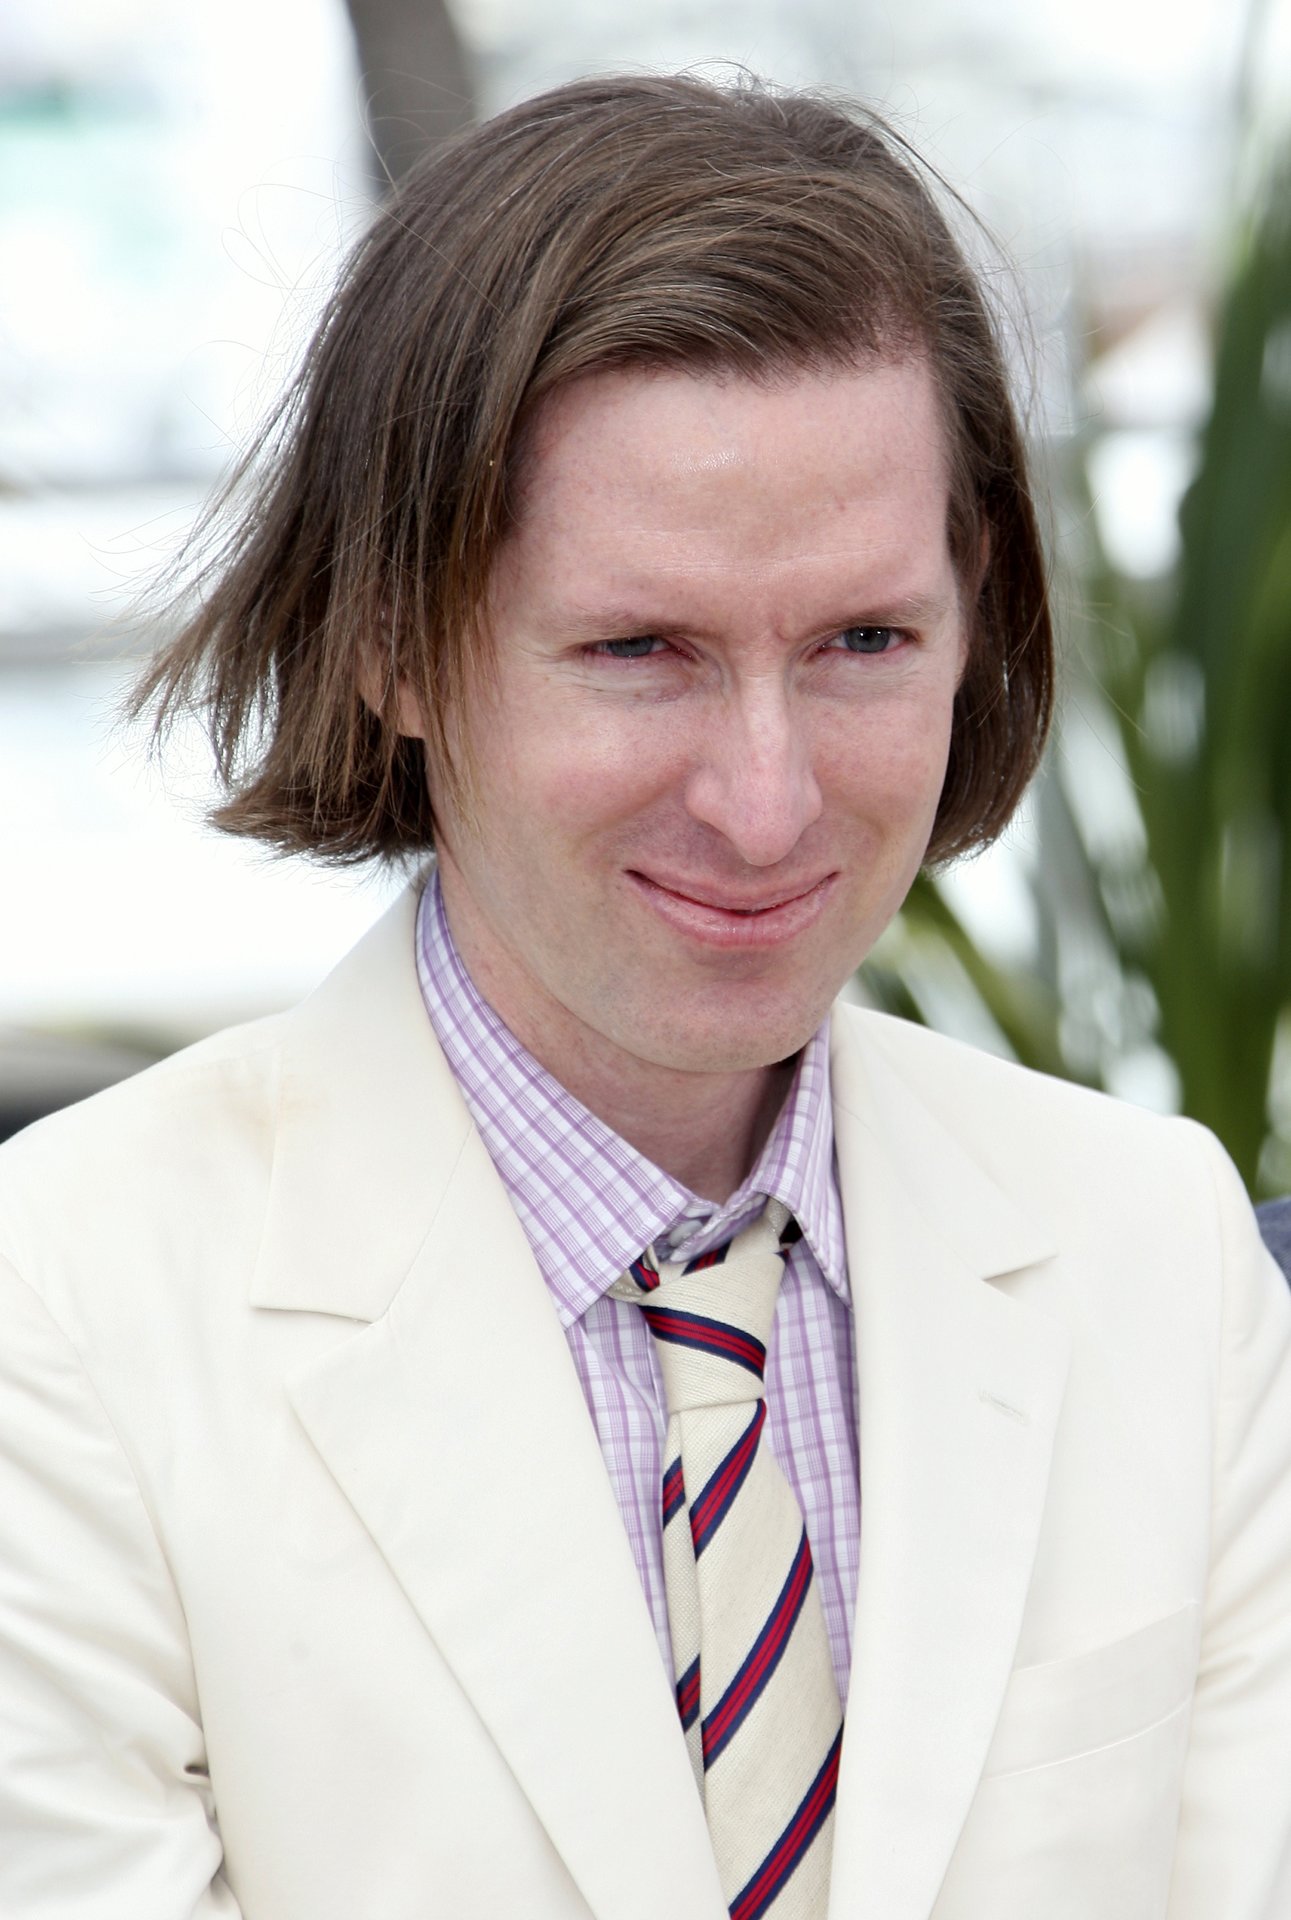 wes anderson iphone wallpaper,hair,white collar worker,forehead,chin,businessperson